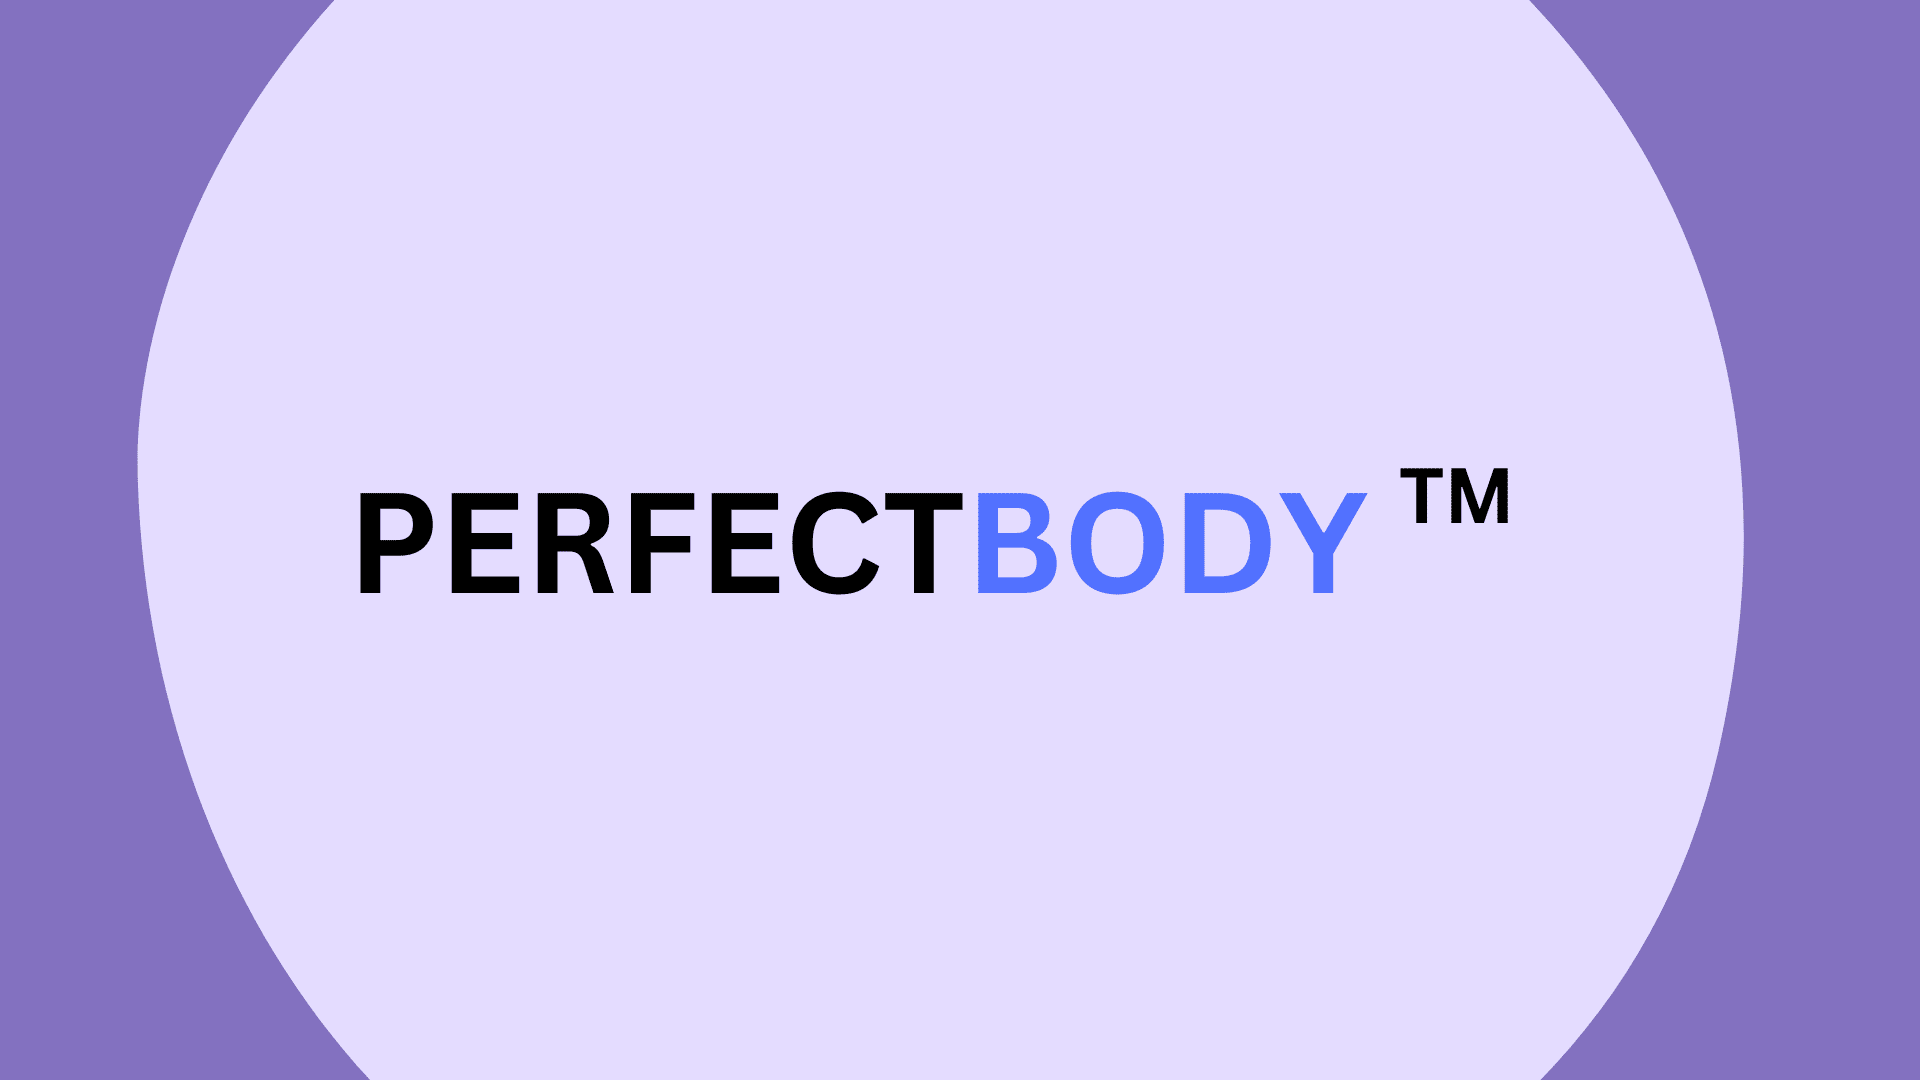 Perfect Body Logo in the center of a circle